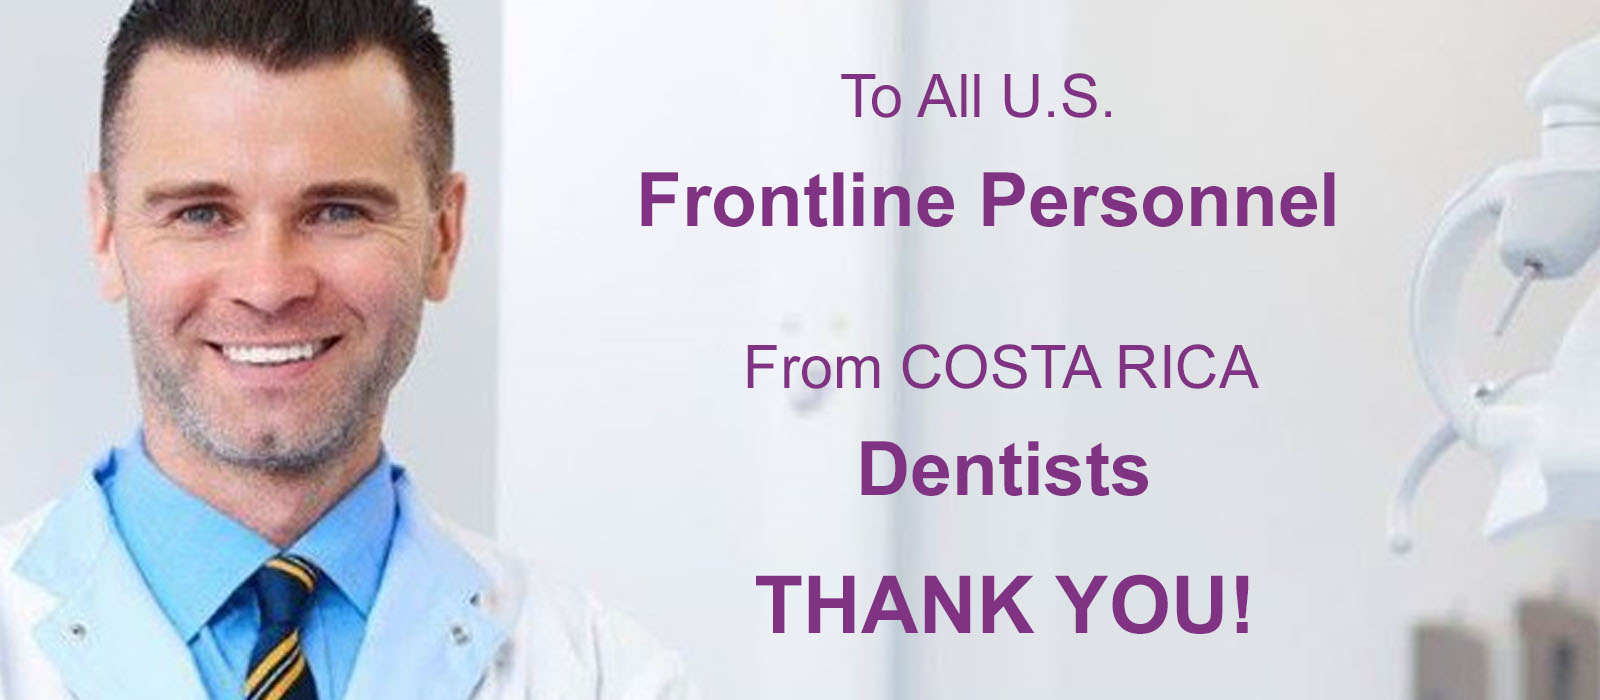 Picture of a smiling frontline dentist offering a large discounts on dental work by Frontline Dental CR in San Jose, Costa Rica.  The dentist is wearing a white dental uniform uniform and looking directly into the camera with a big smile.